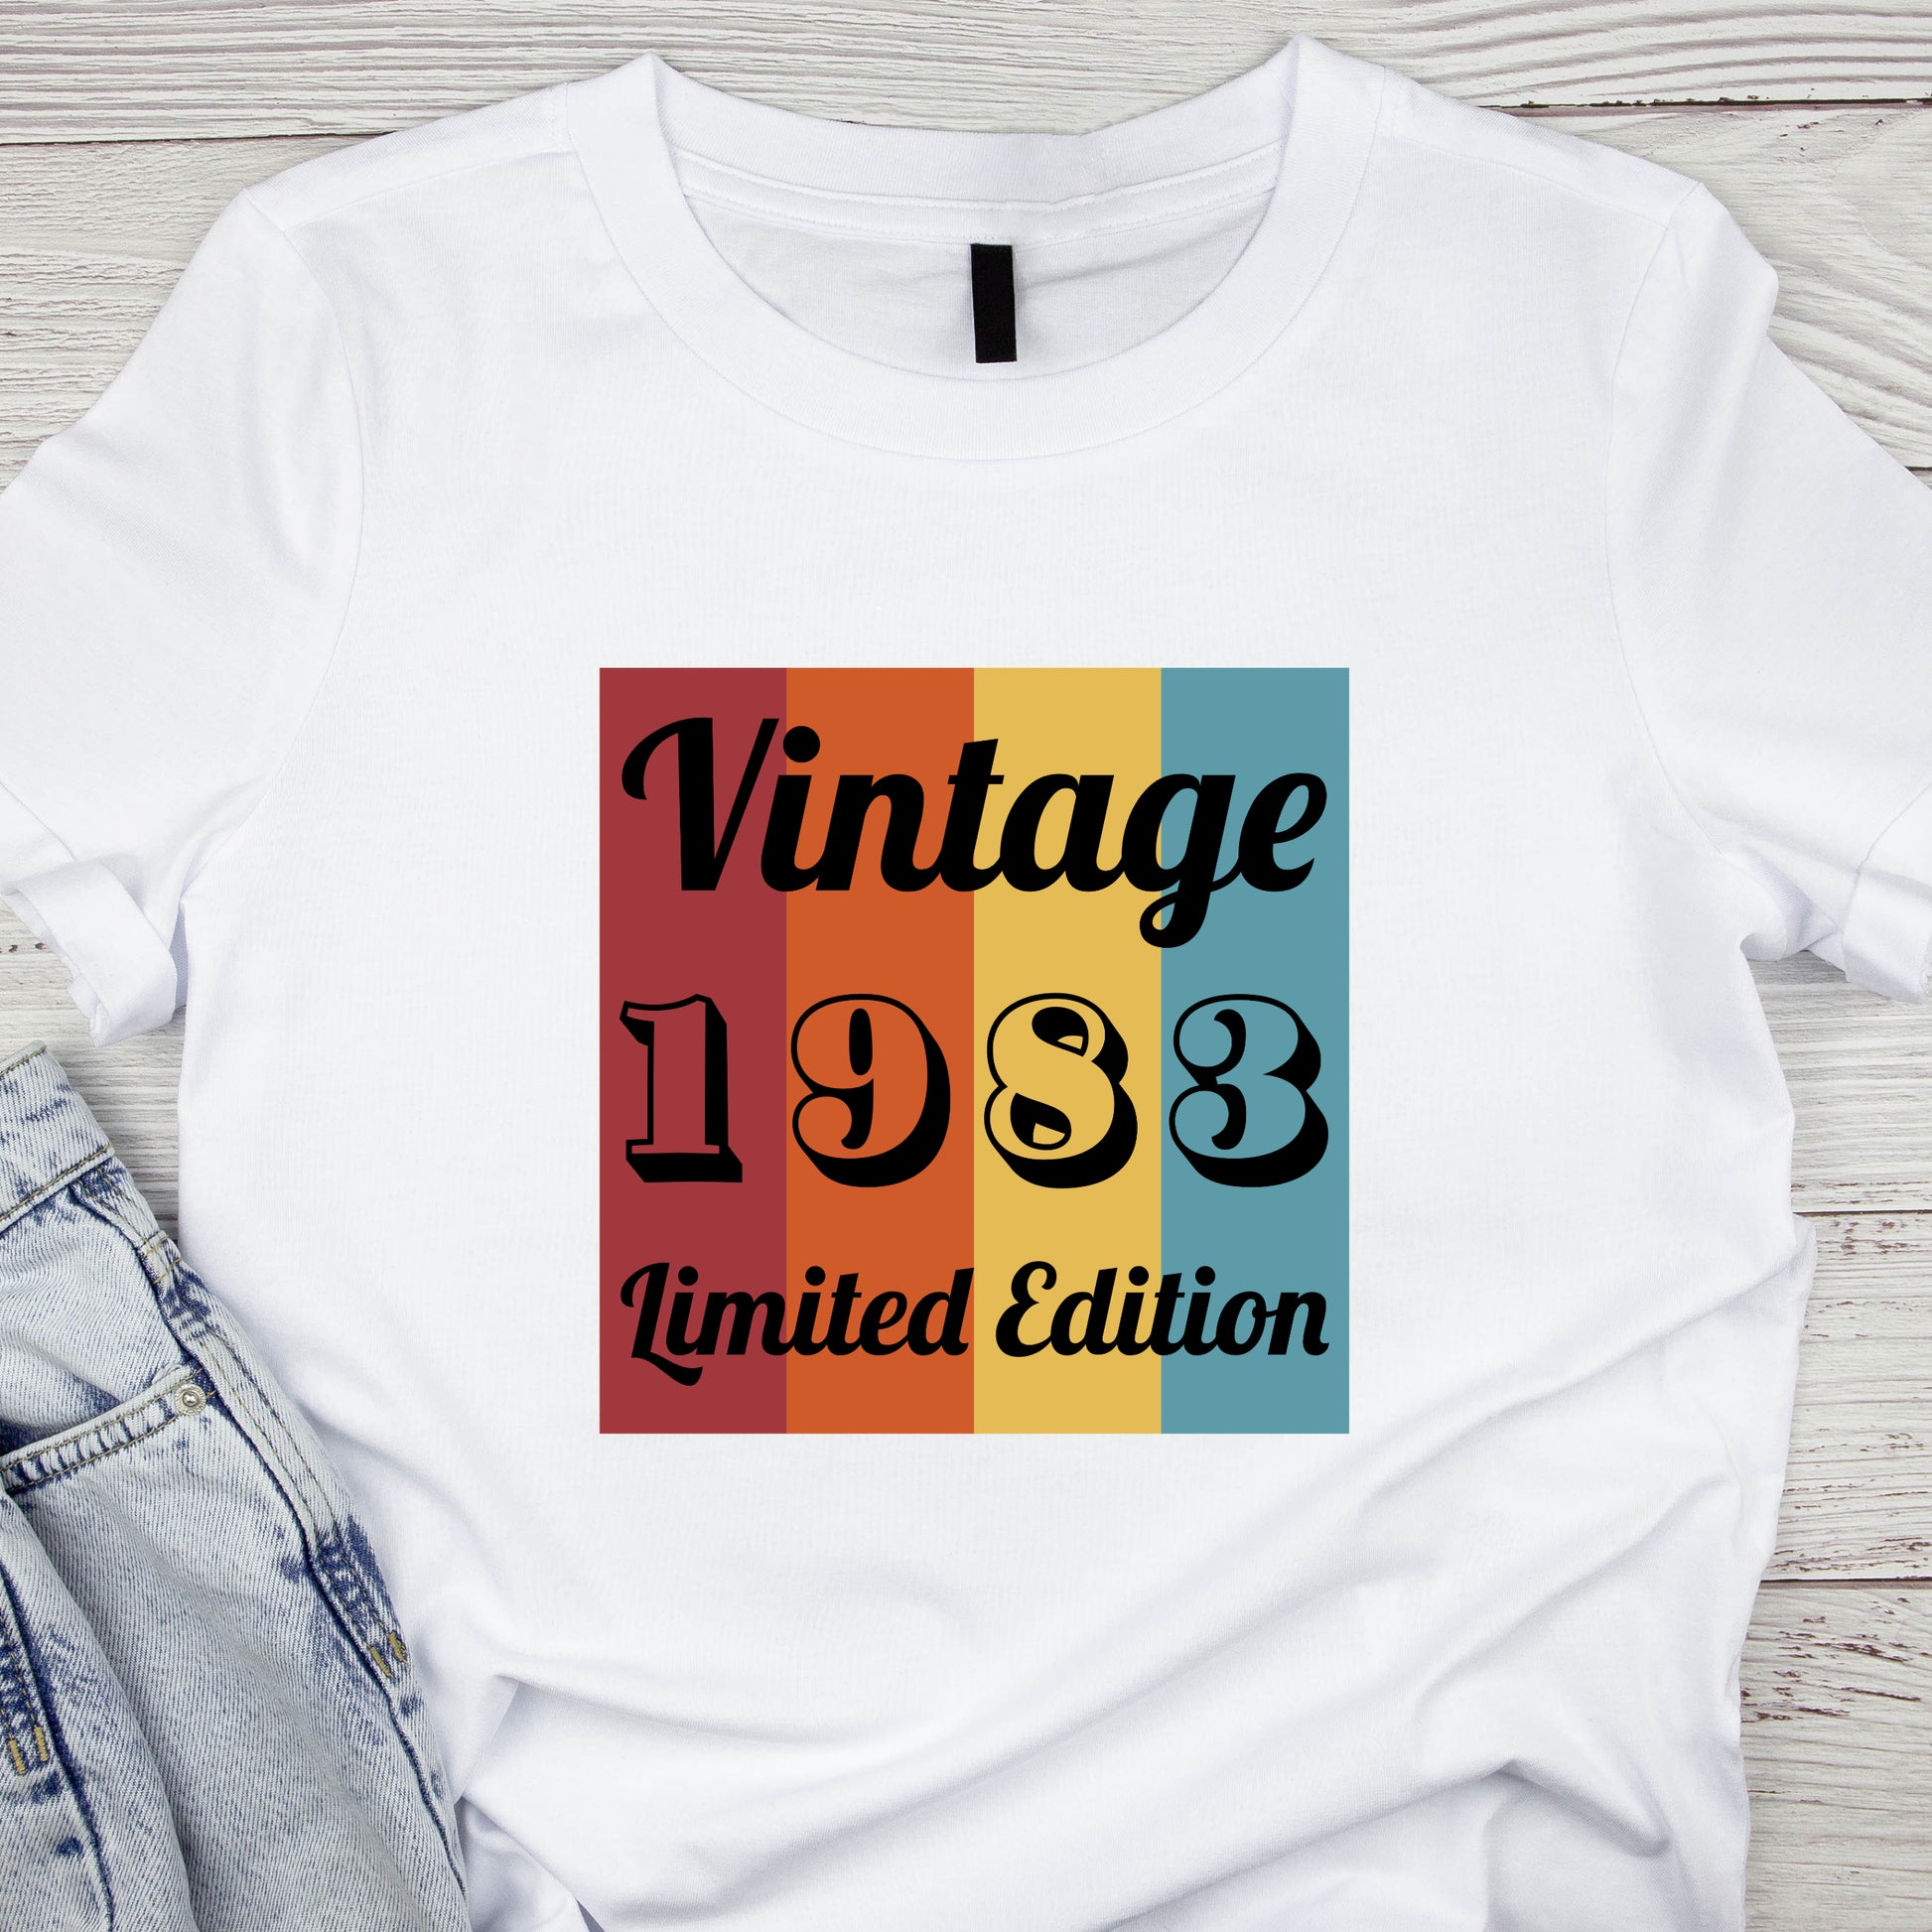 classic t-shirt with square design containing 4 colored block stripes and Vintage 1983 Limited Edition text printed in black. Available in several colors.